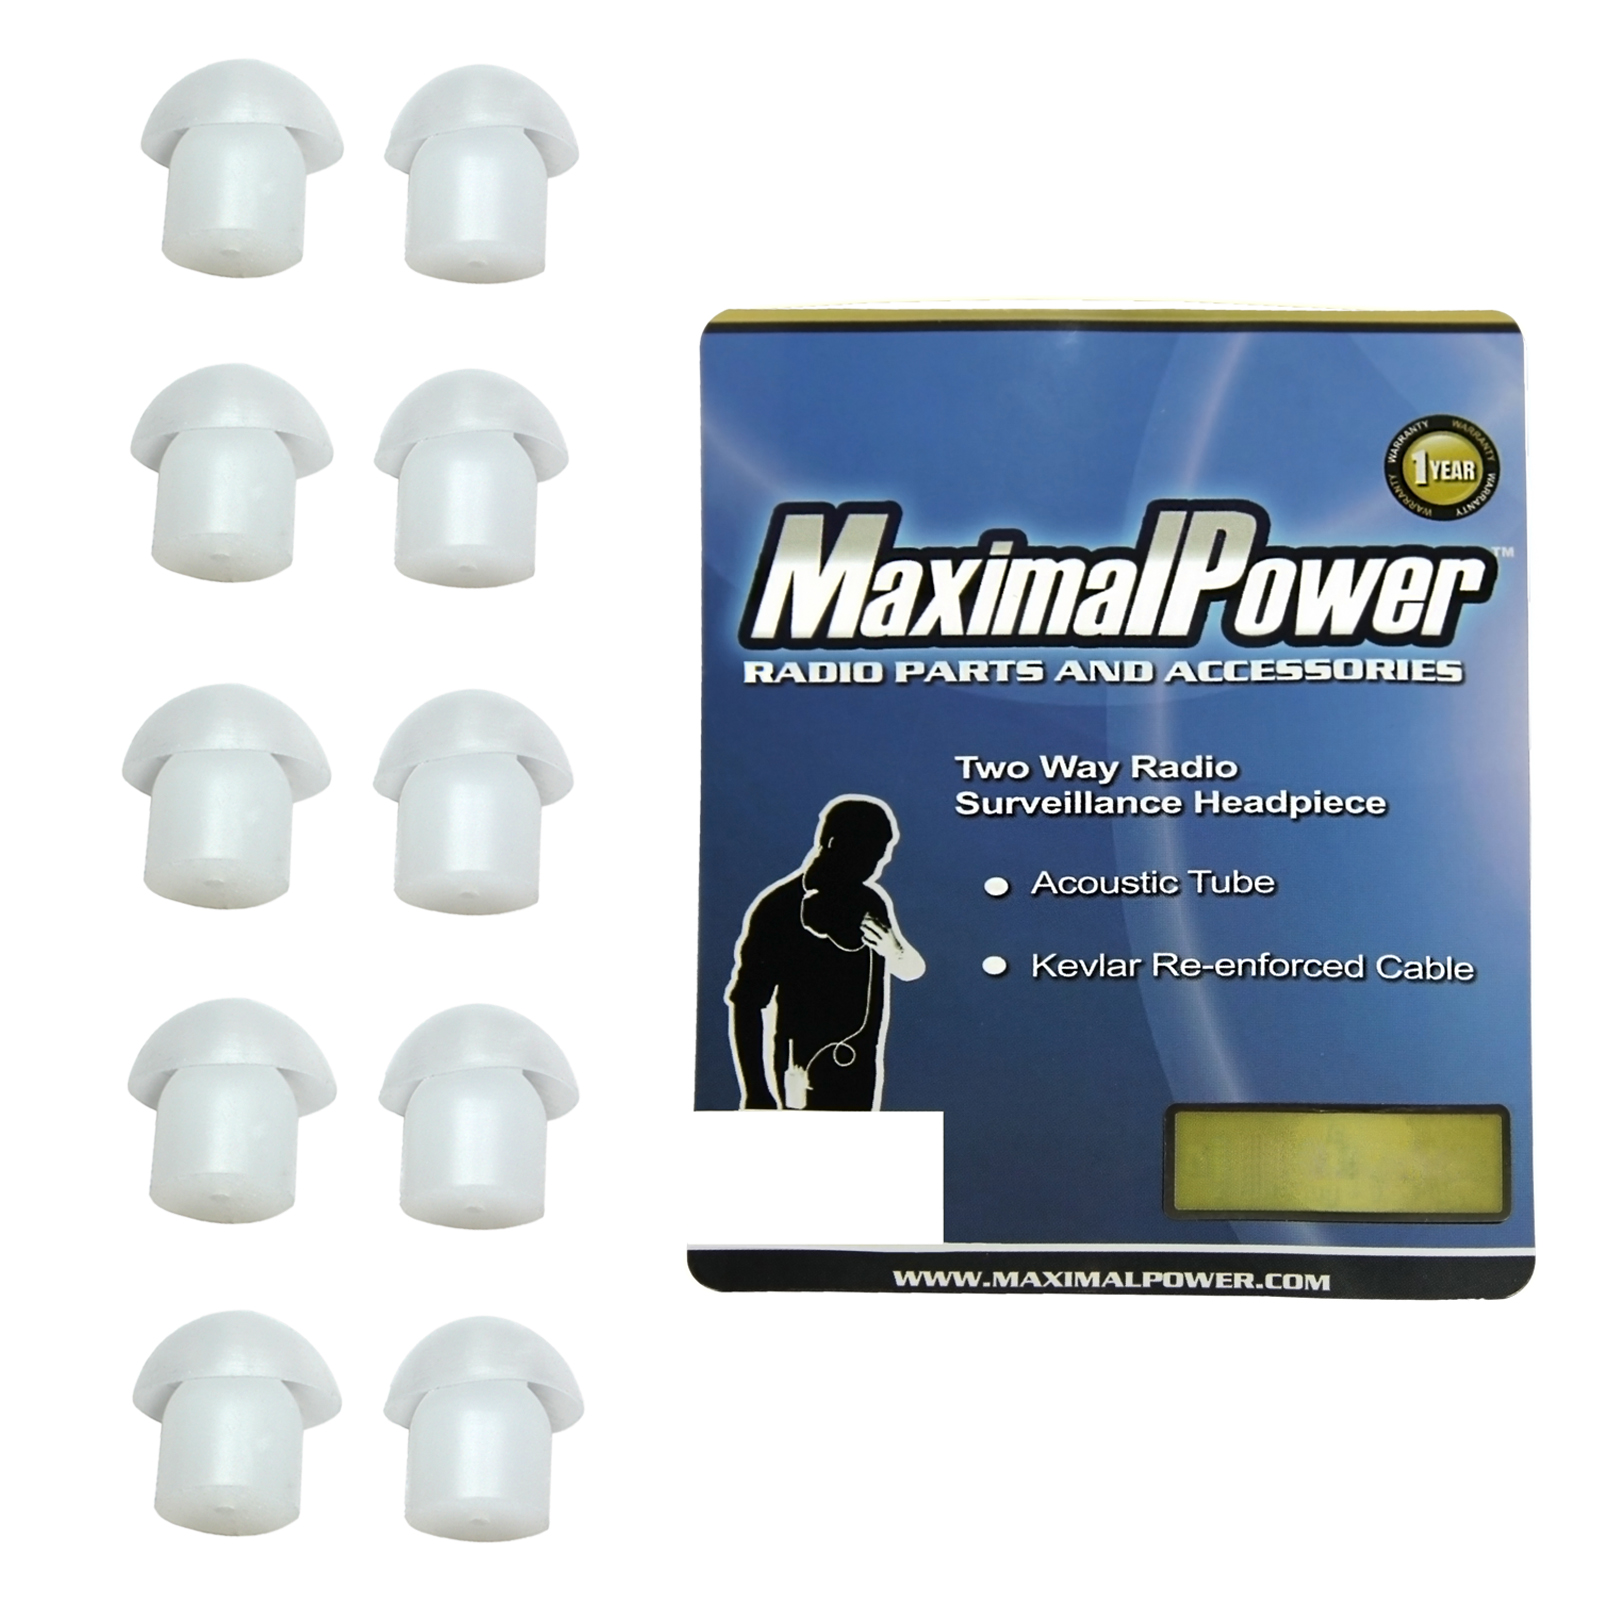 MaximalPower Clear Silicone Earpiece Ear Tip for Motorola Kenwood Two-Way Radio Headset - 10 Pack - image 1 of 2